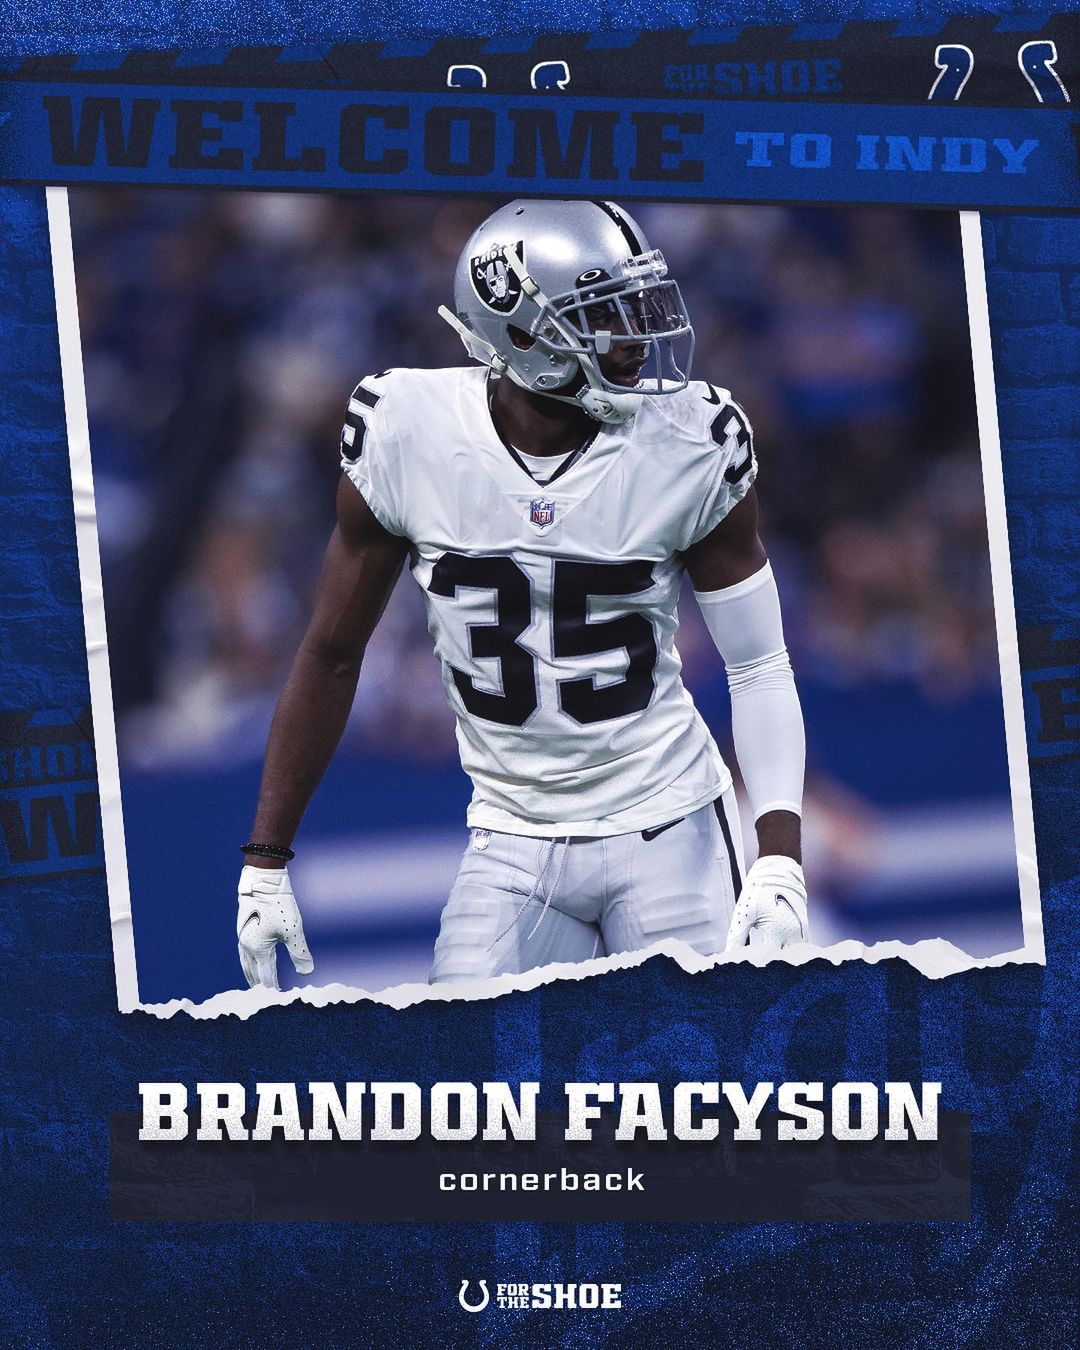 Welcome to Indy, Brandon!...